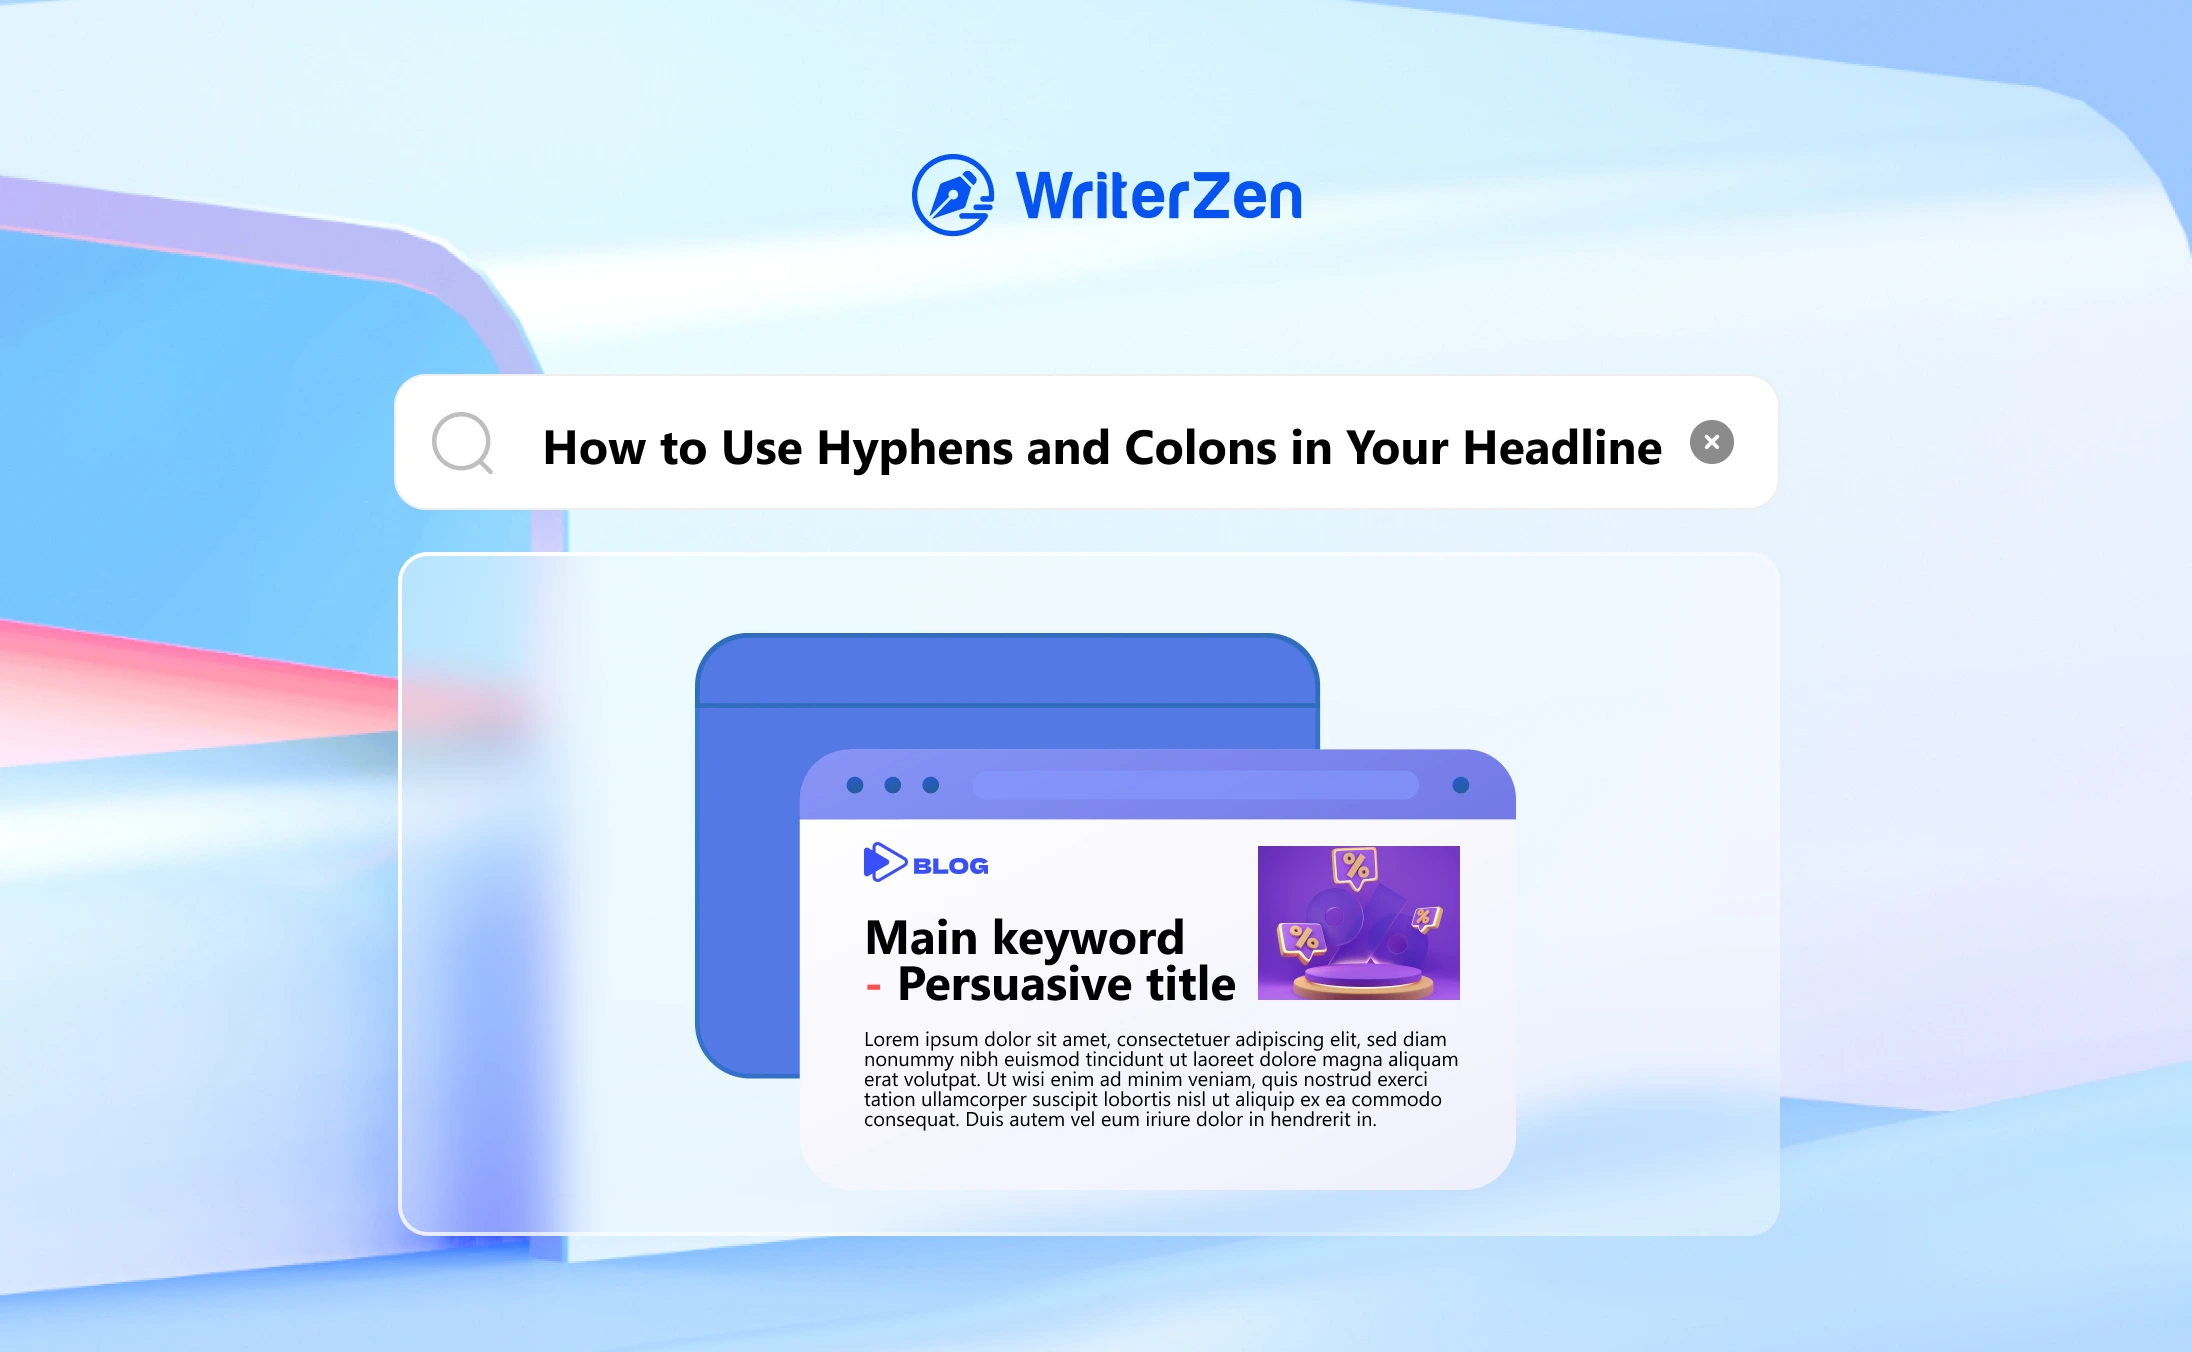 How to Use Hyphens and Colons in Your Headline